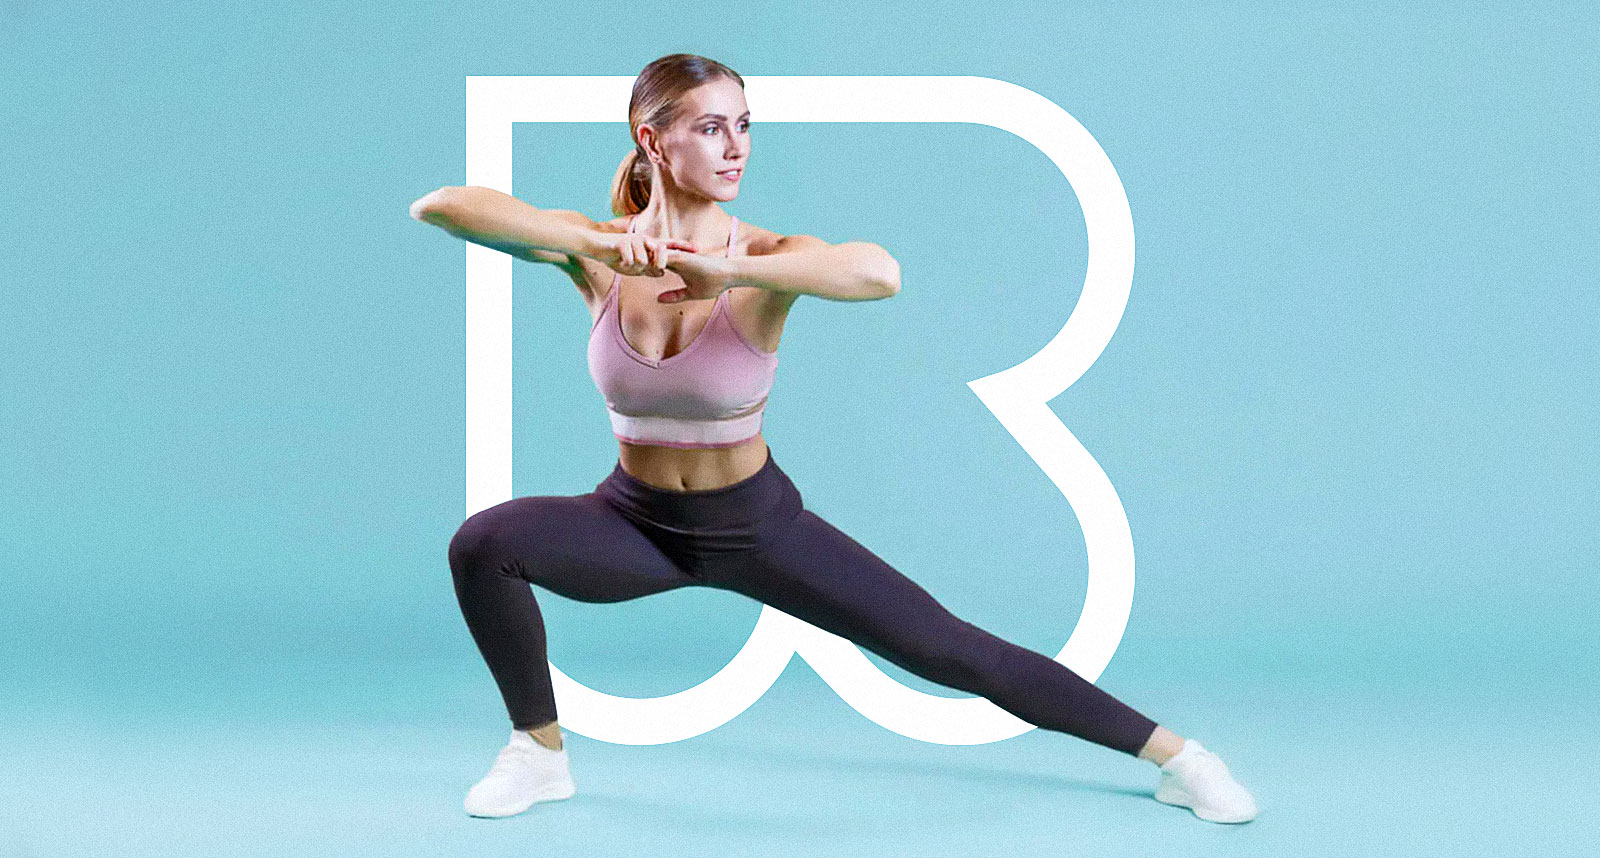 Mobile fitness app and video exercises Reshape cover